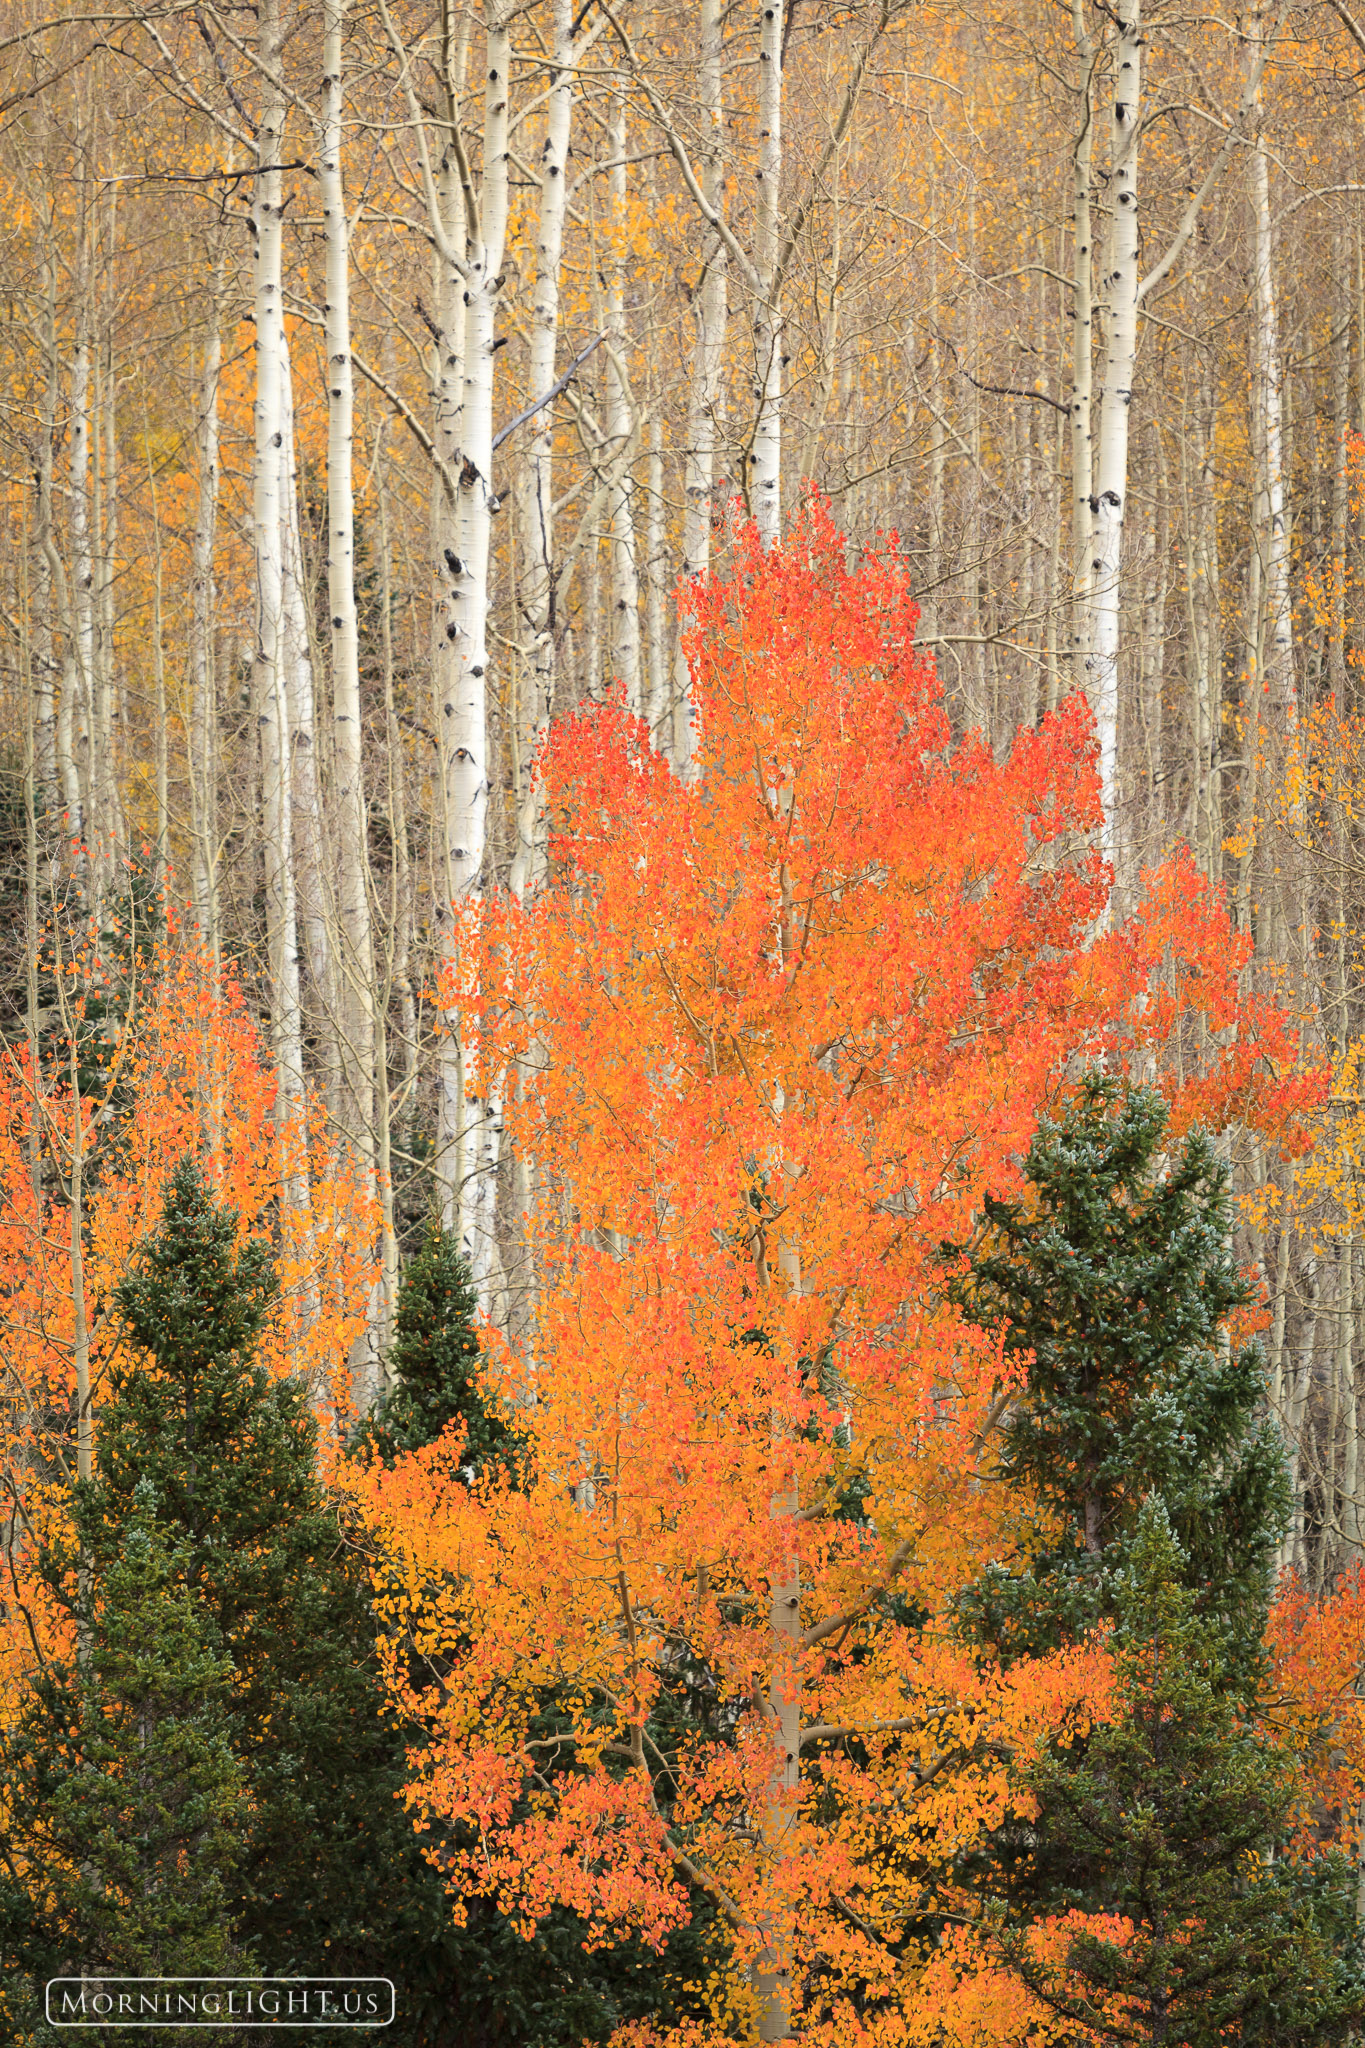 Autumn is a time of wonderful and colorful contrasts that can be seen almost everywhere you look. Here an aspen has taken on...